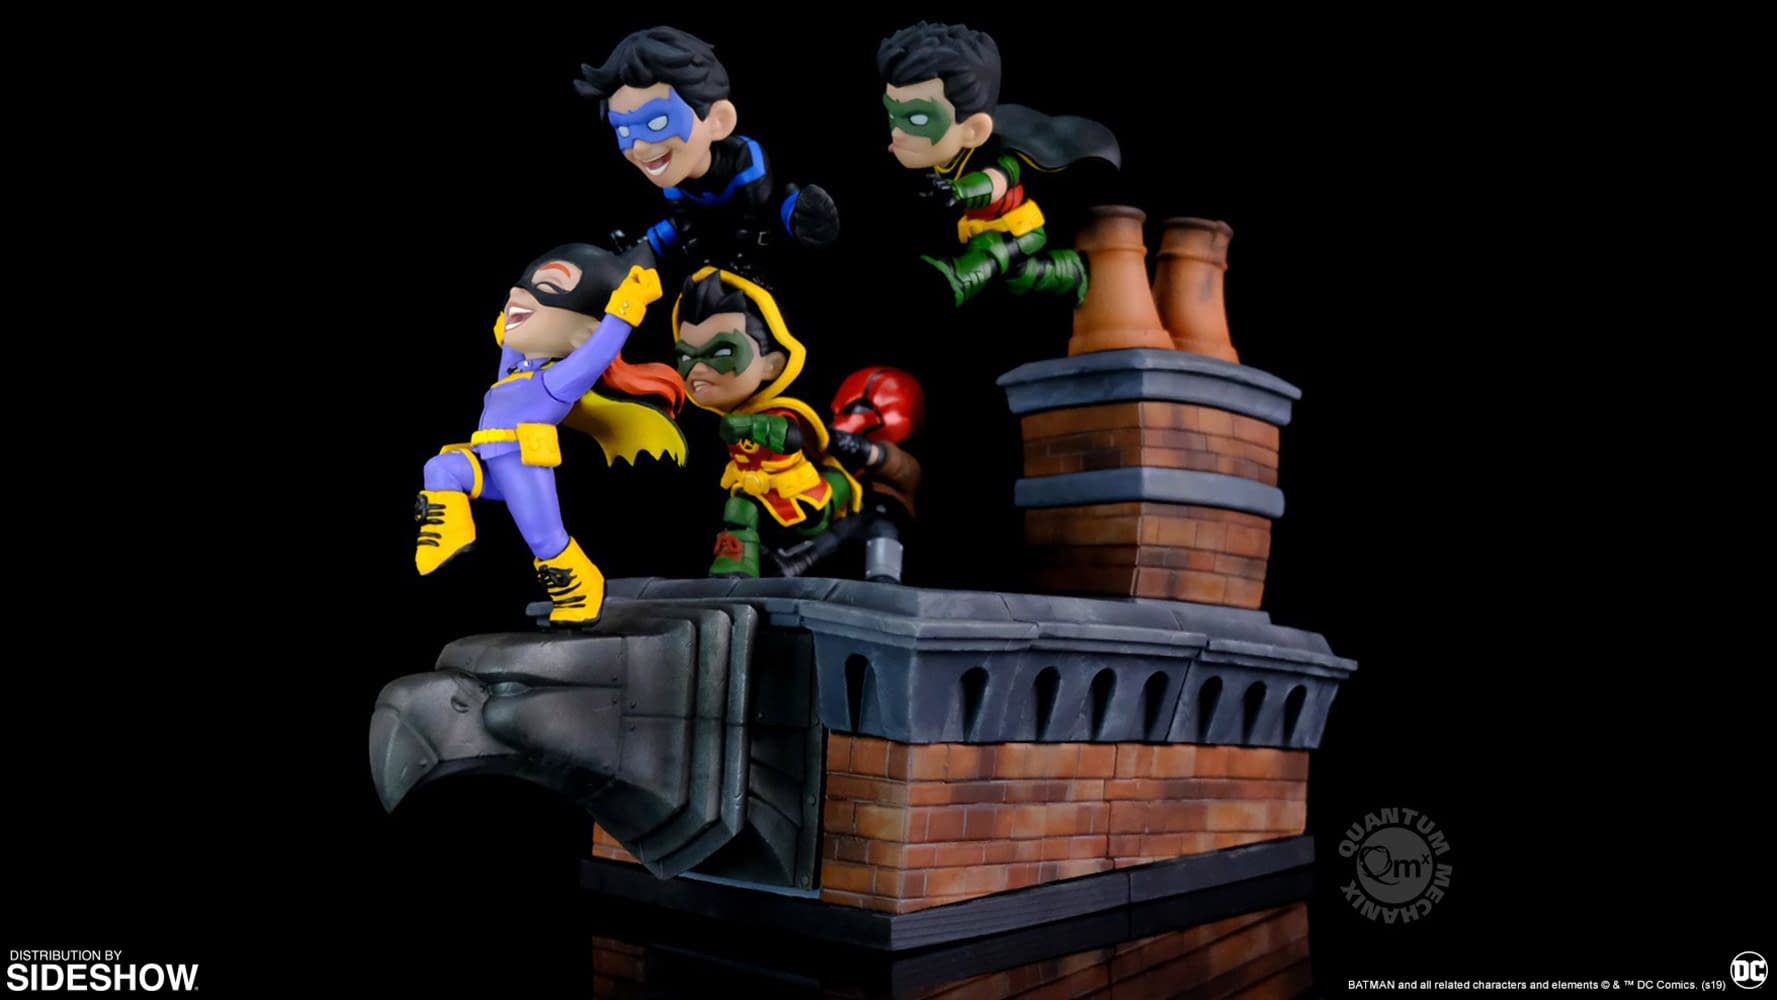 The Bat Family Teams-Up for Adorable Q-Master Statue